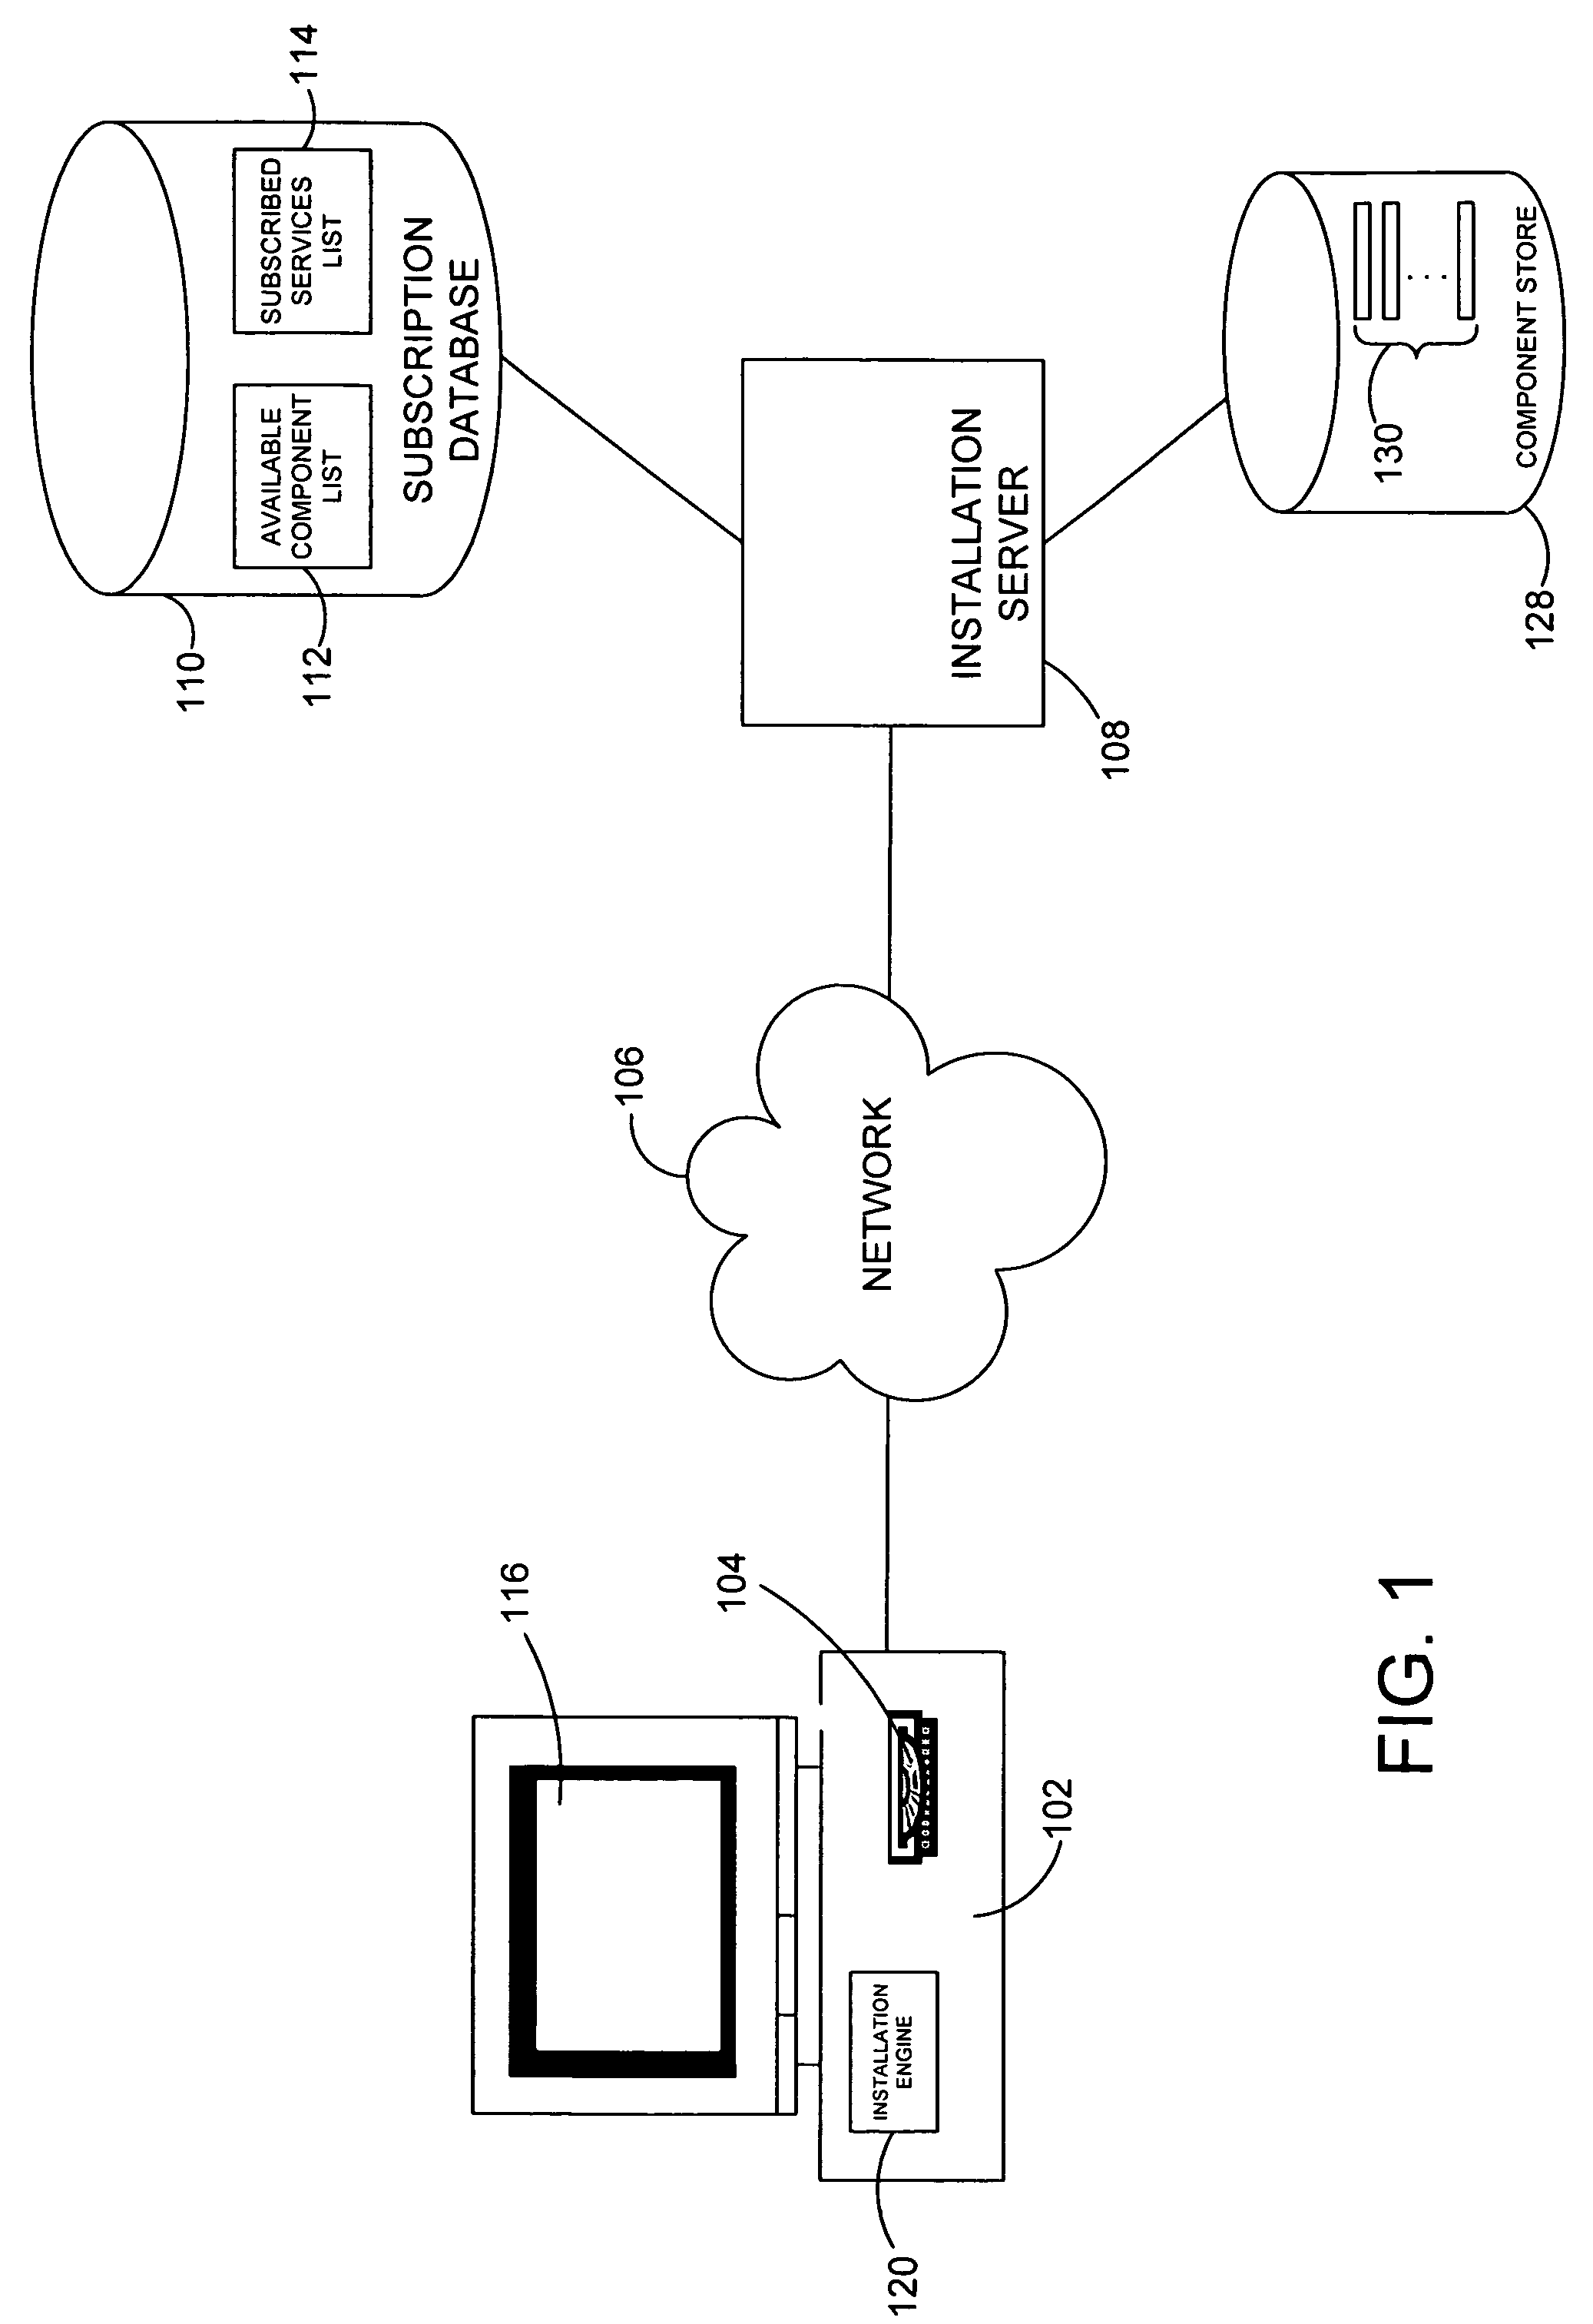 System and method for automatically generating networked service installation based on subscription status